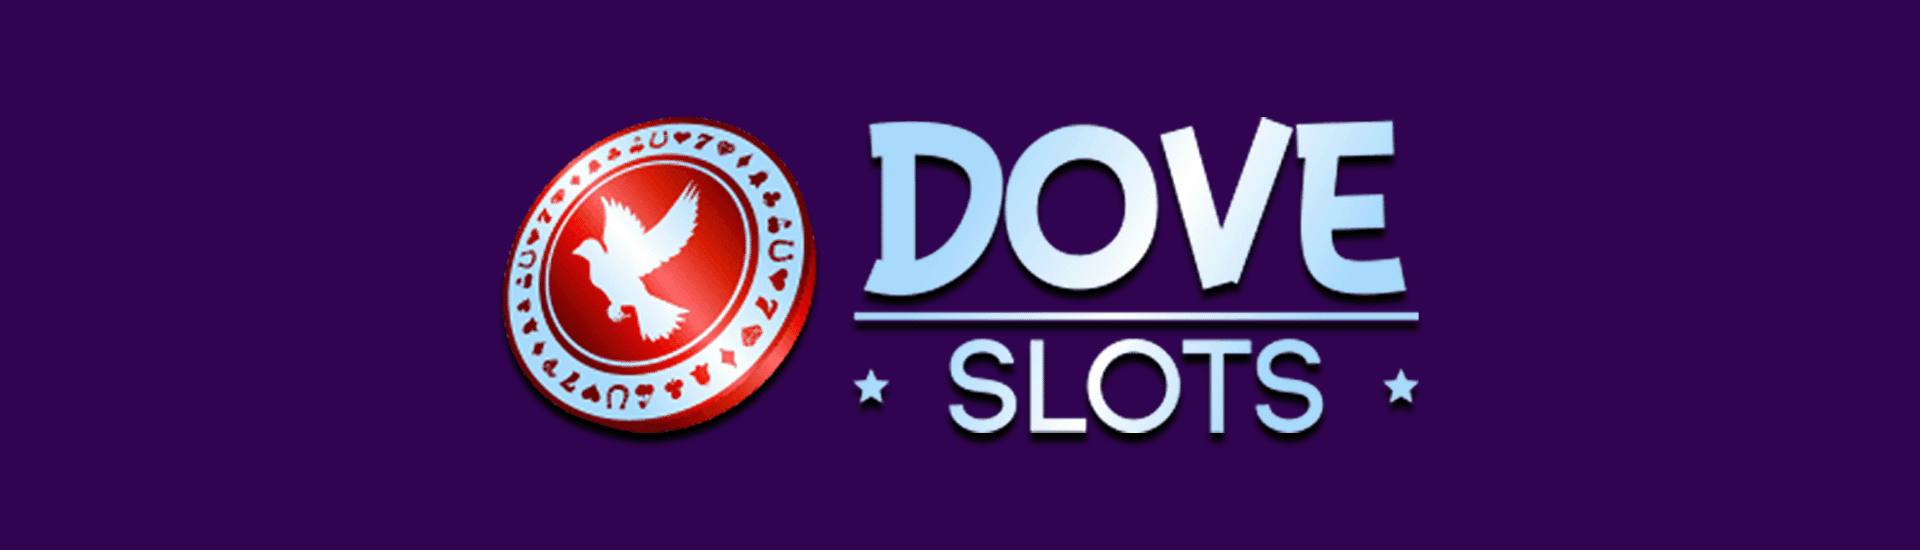 Dove Slots Featured Image